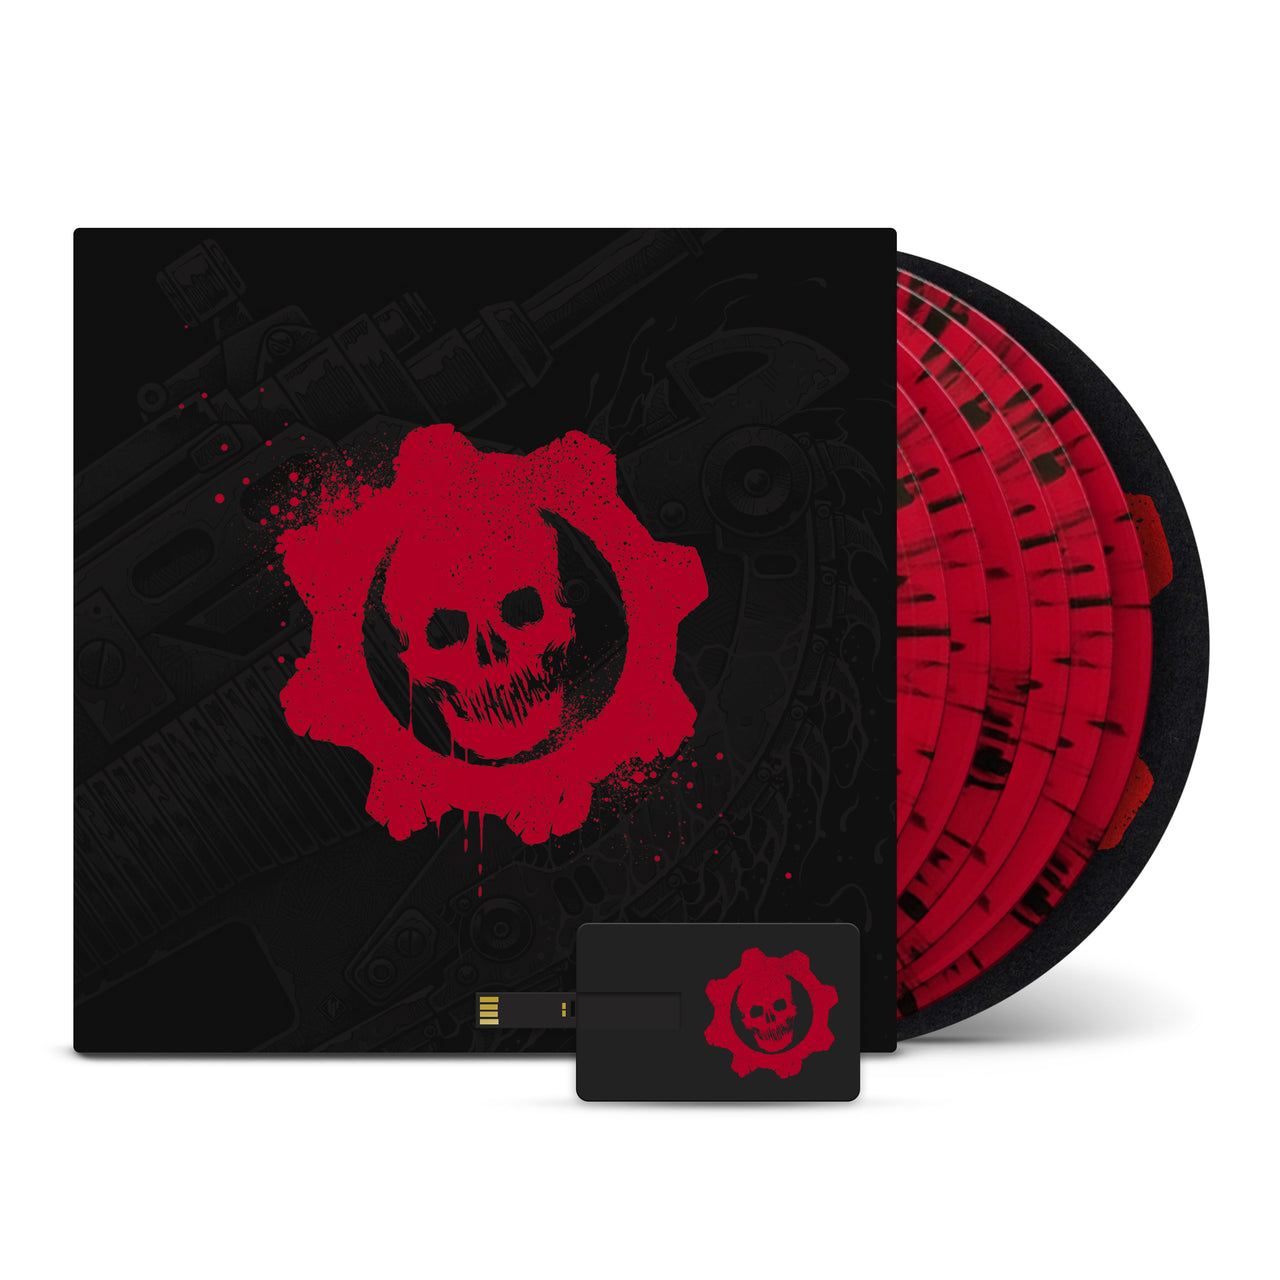 Gears of War: Original Trilogy Soundtrack (Limited Special Edition)